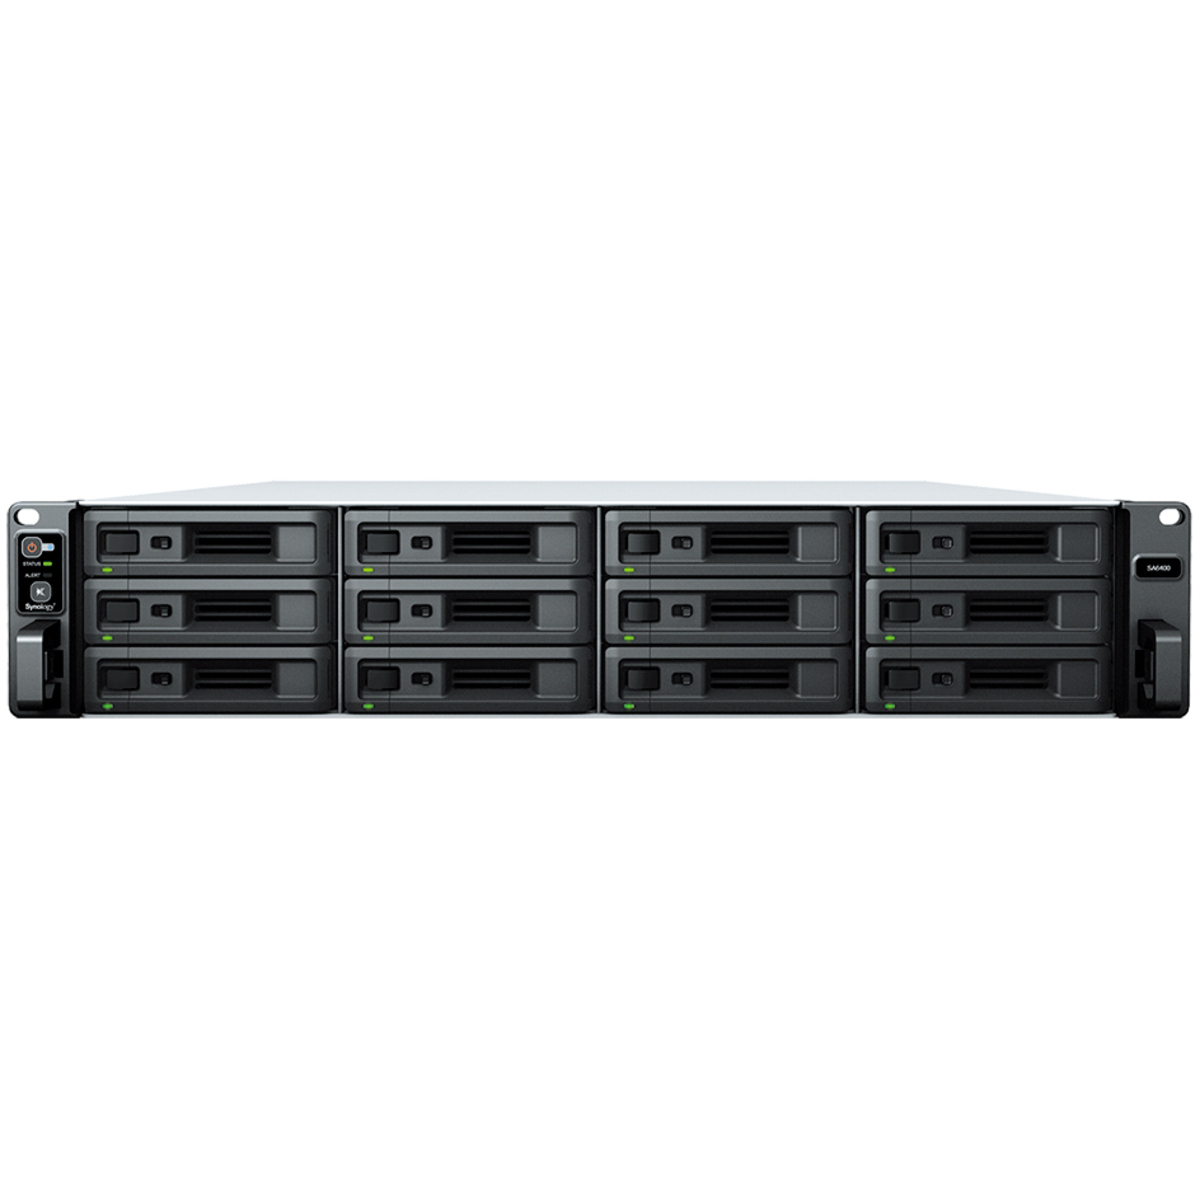 Synology RackStation SA6400 176tb 12-Bay RackMount Large Business / Enterprise NAS - Network Attached Storage Device 8x22tb Western Digital Ultrastar HC570 WUH722222ALE6L4 3.5 7200rpm SATA 6Gb/s HDD ENTERPRISE Class Drives Installed - Burn-In Tested RackStation SA6400